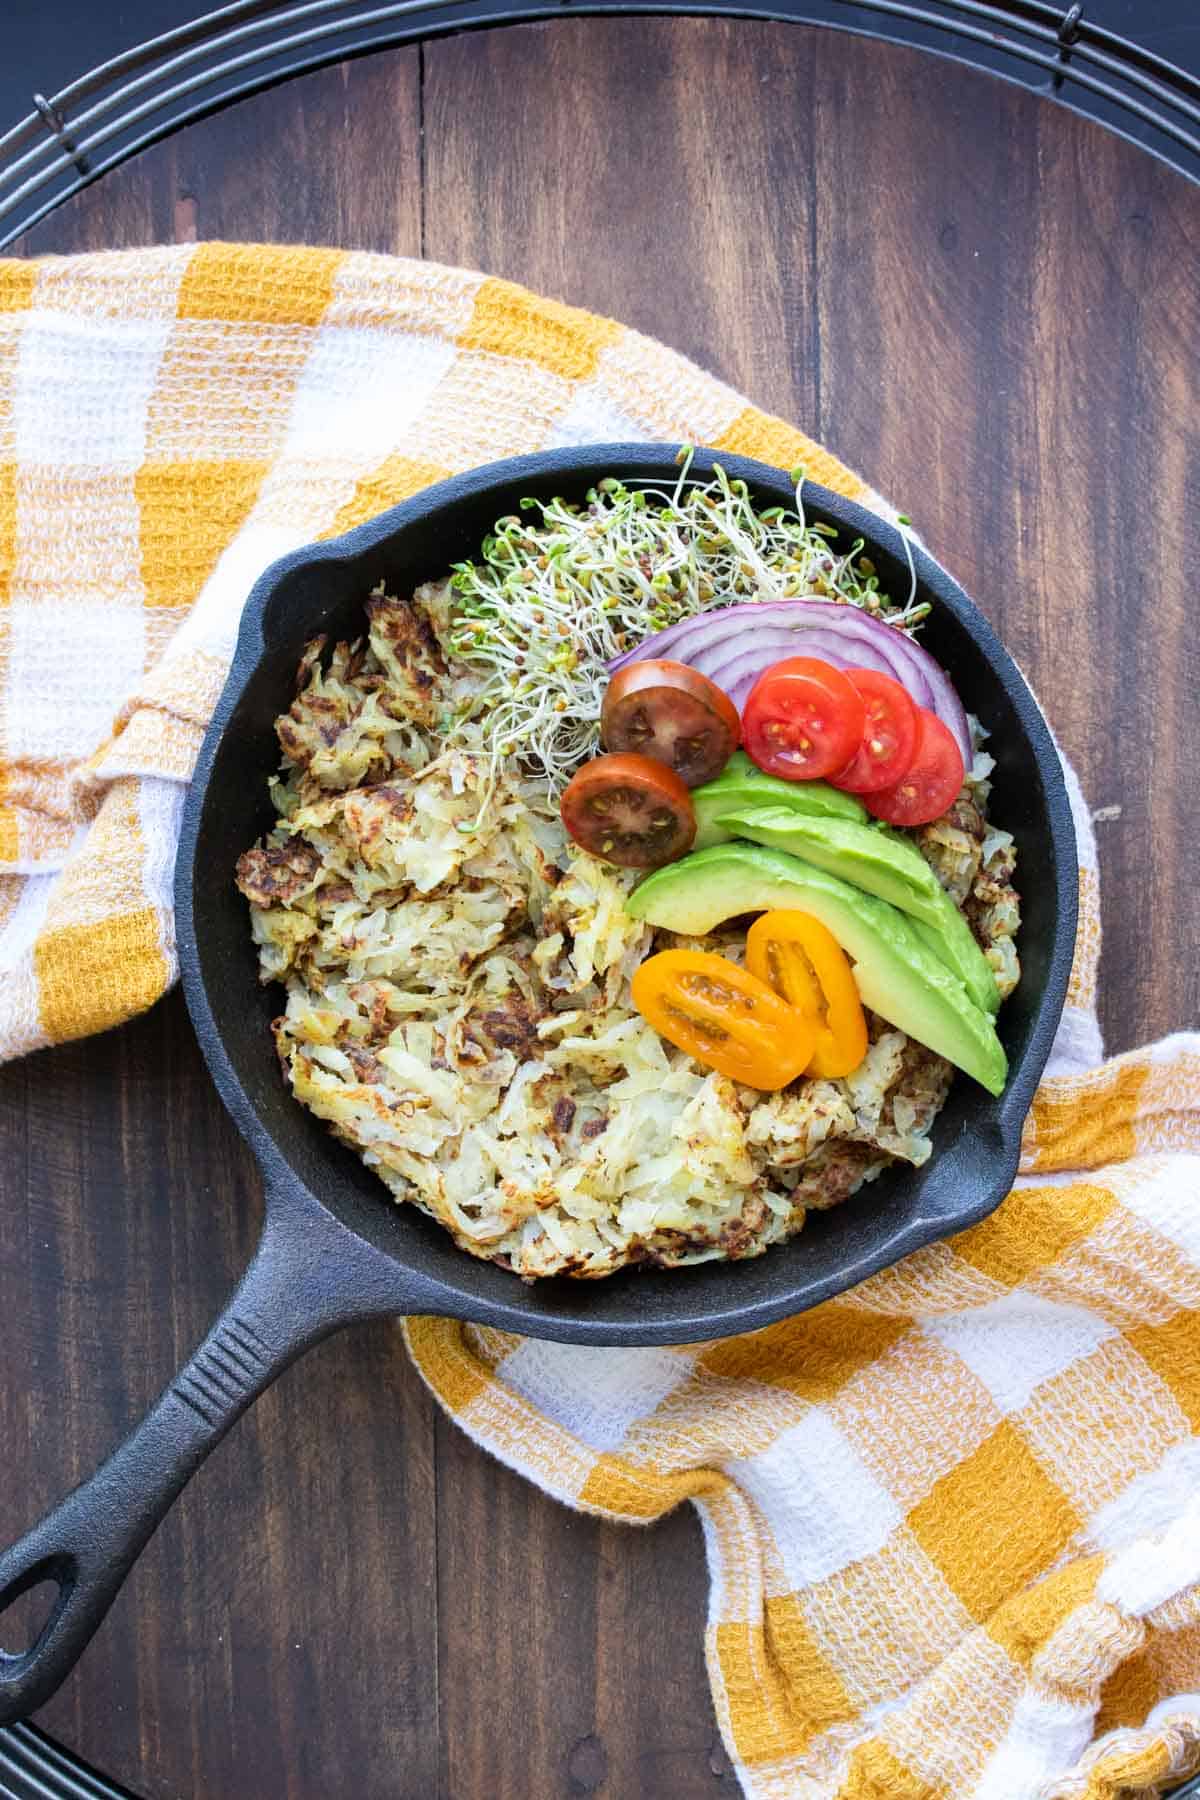 Skillet with cooked hashbrowns and pile of veggies